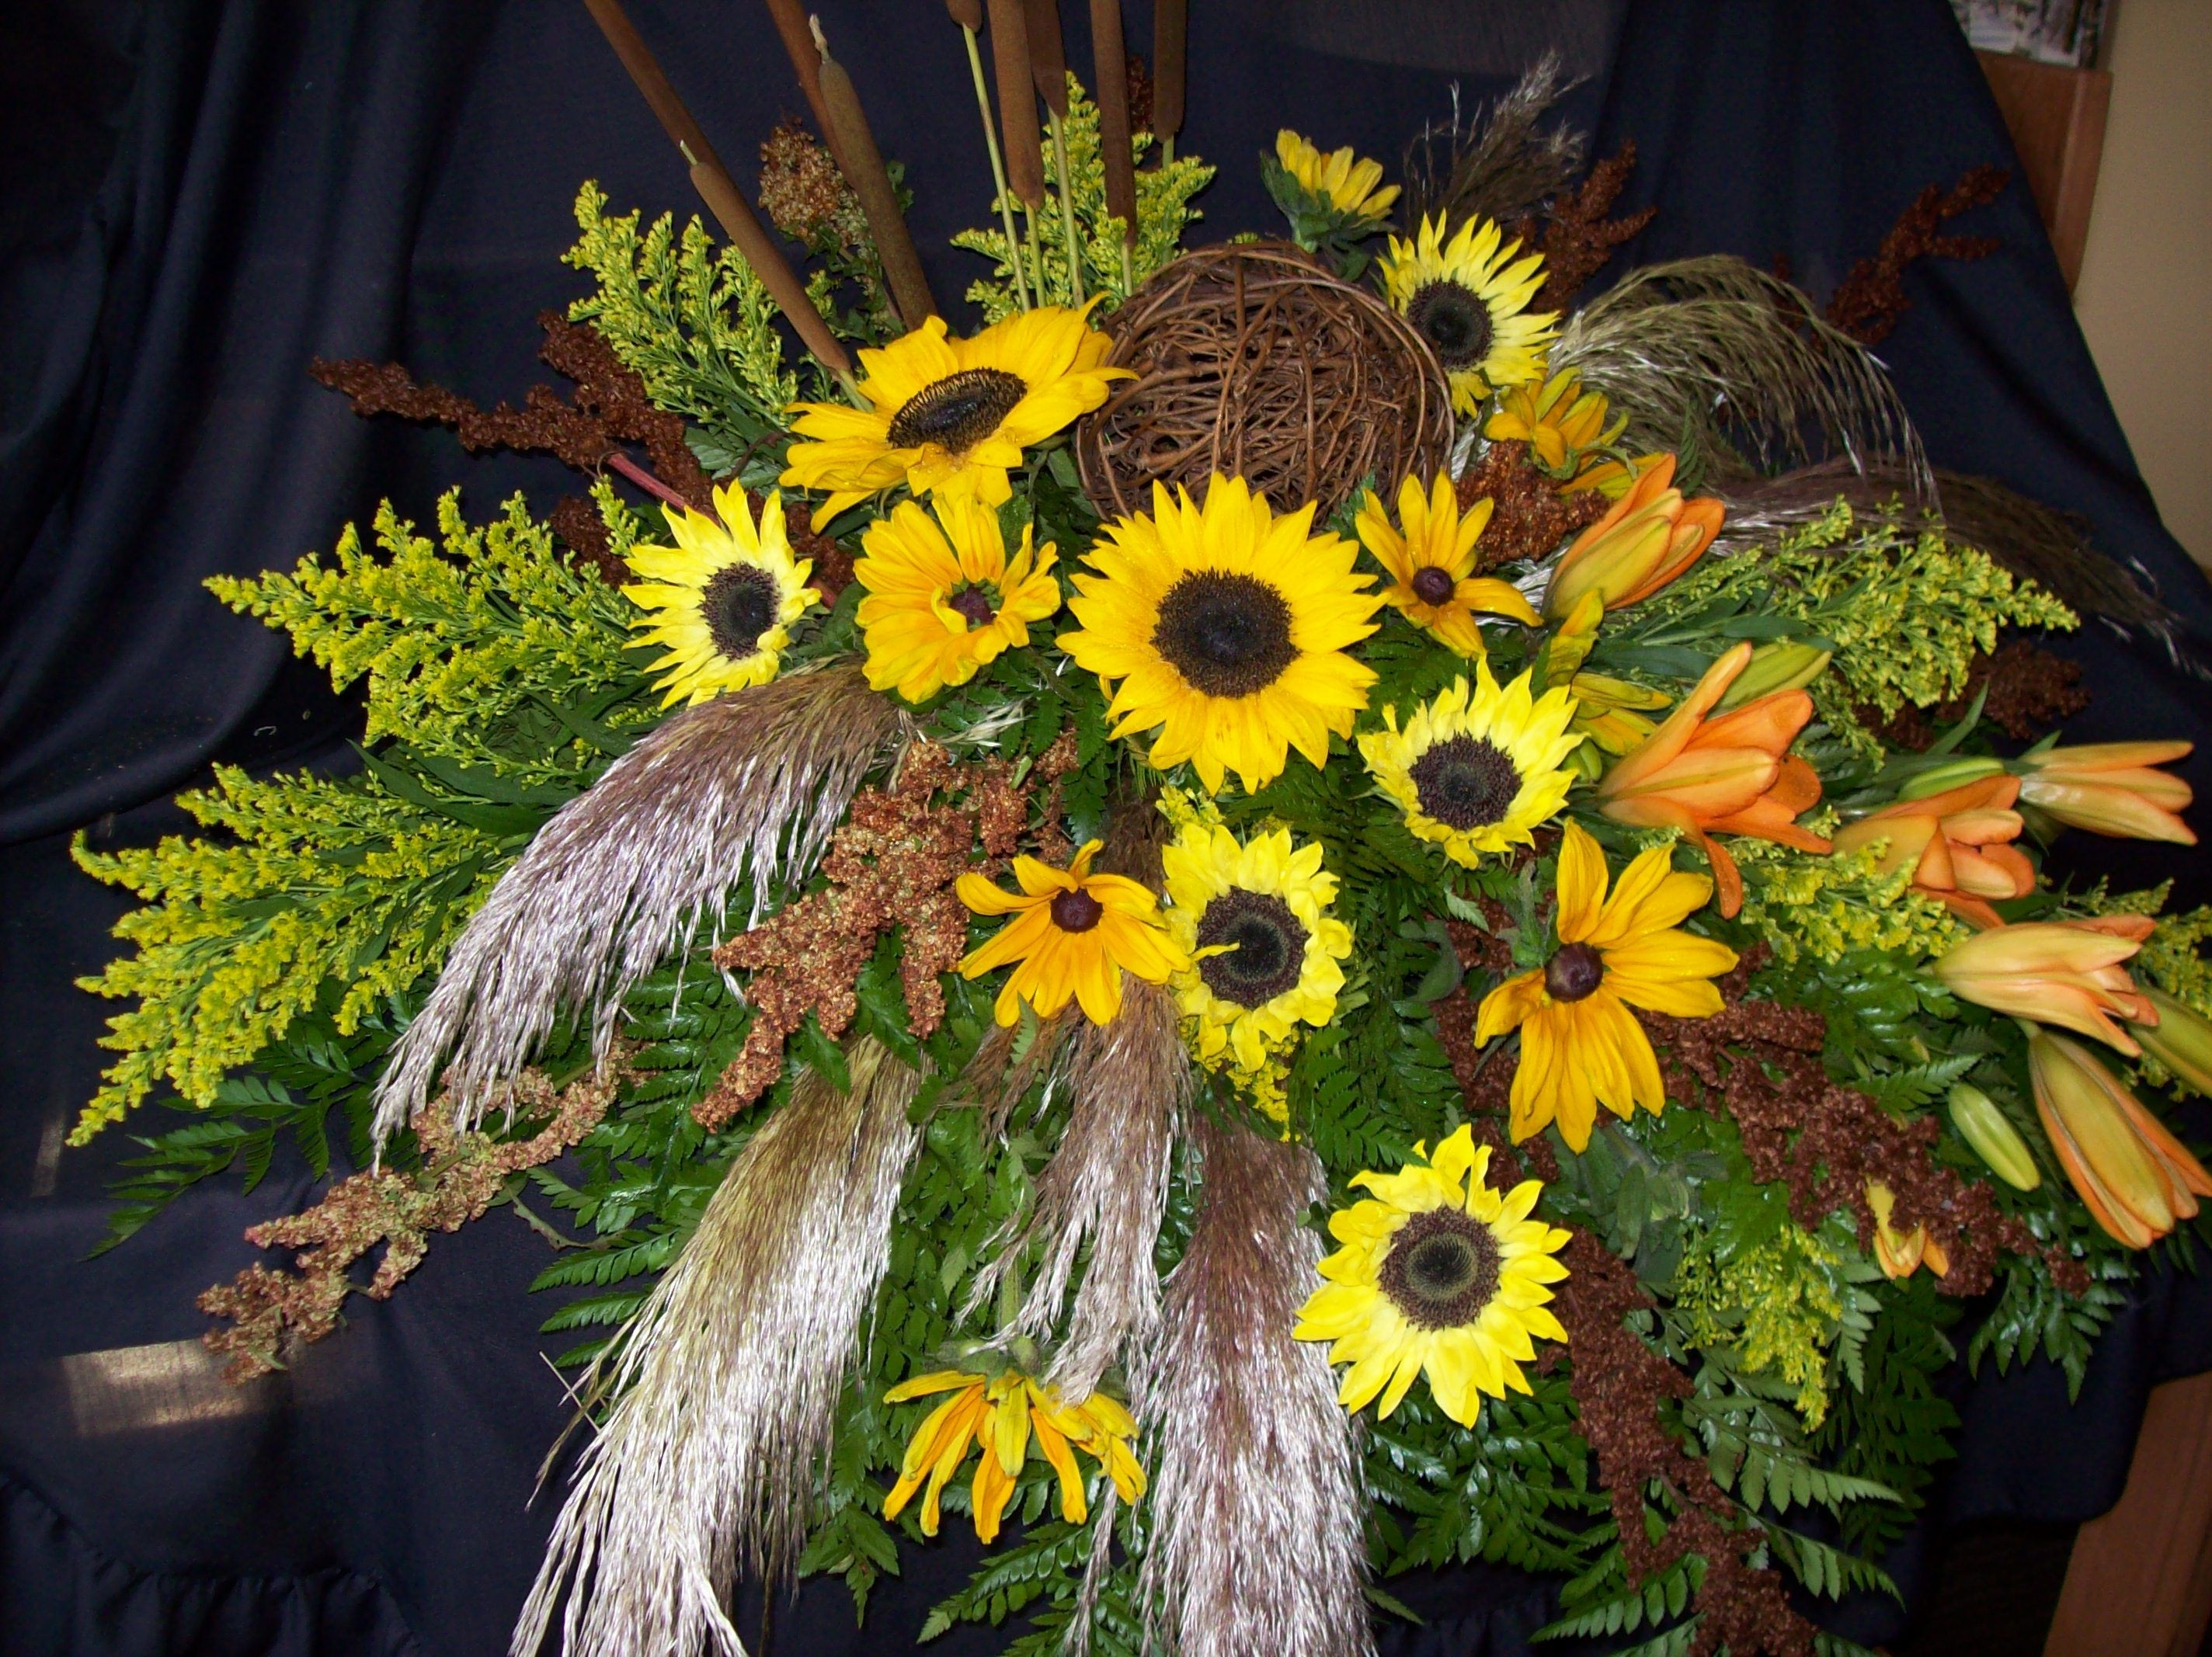 17 Ideal Ftd Cross Vase 2022 free download ftd cross vase of casket spray made for a man who loved sunflowers and cattails pertaining to casket spray made for a man who loved sunflowers and cattails funeral floral arrangements